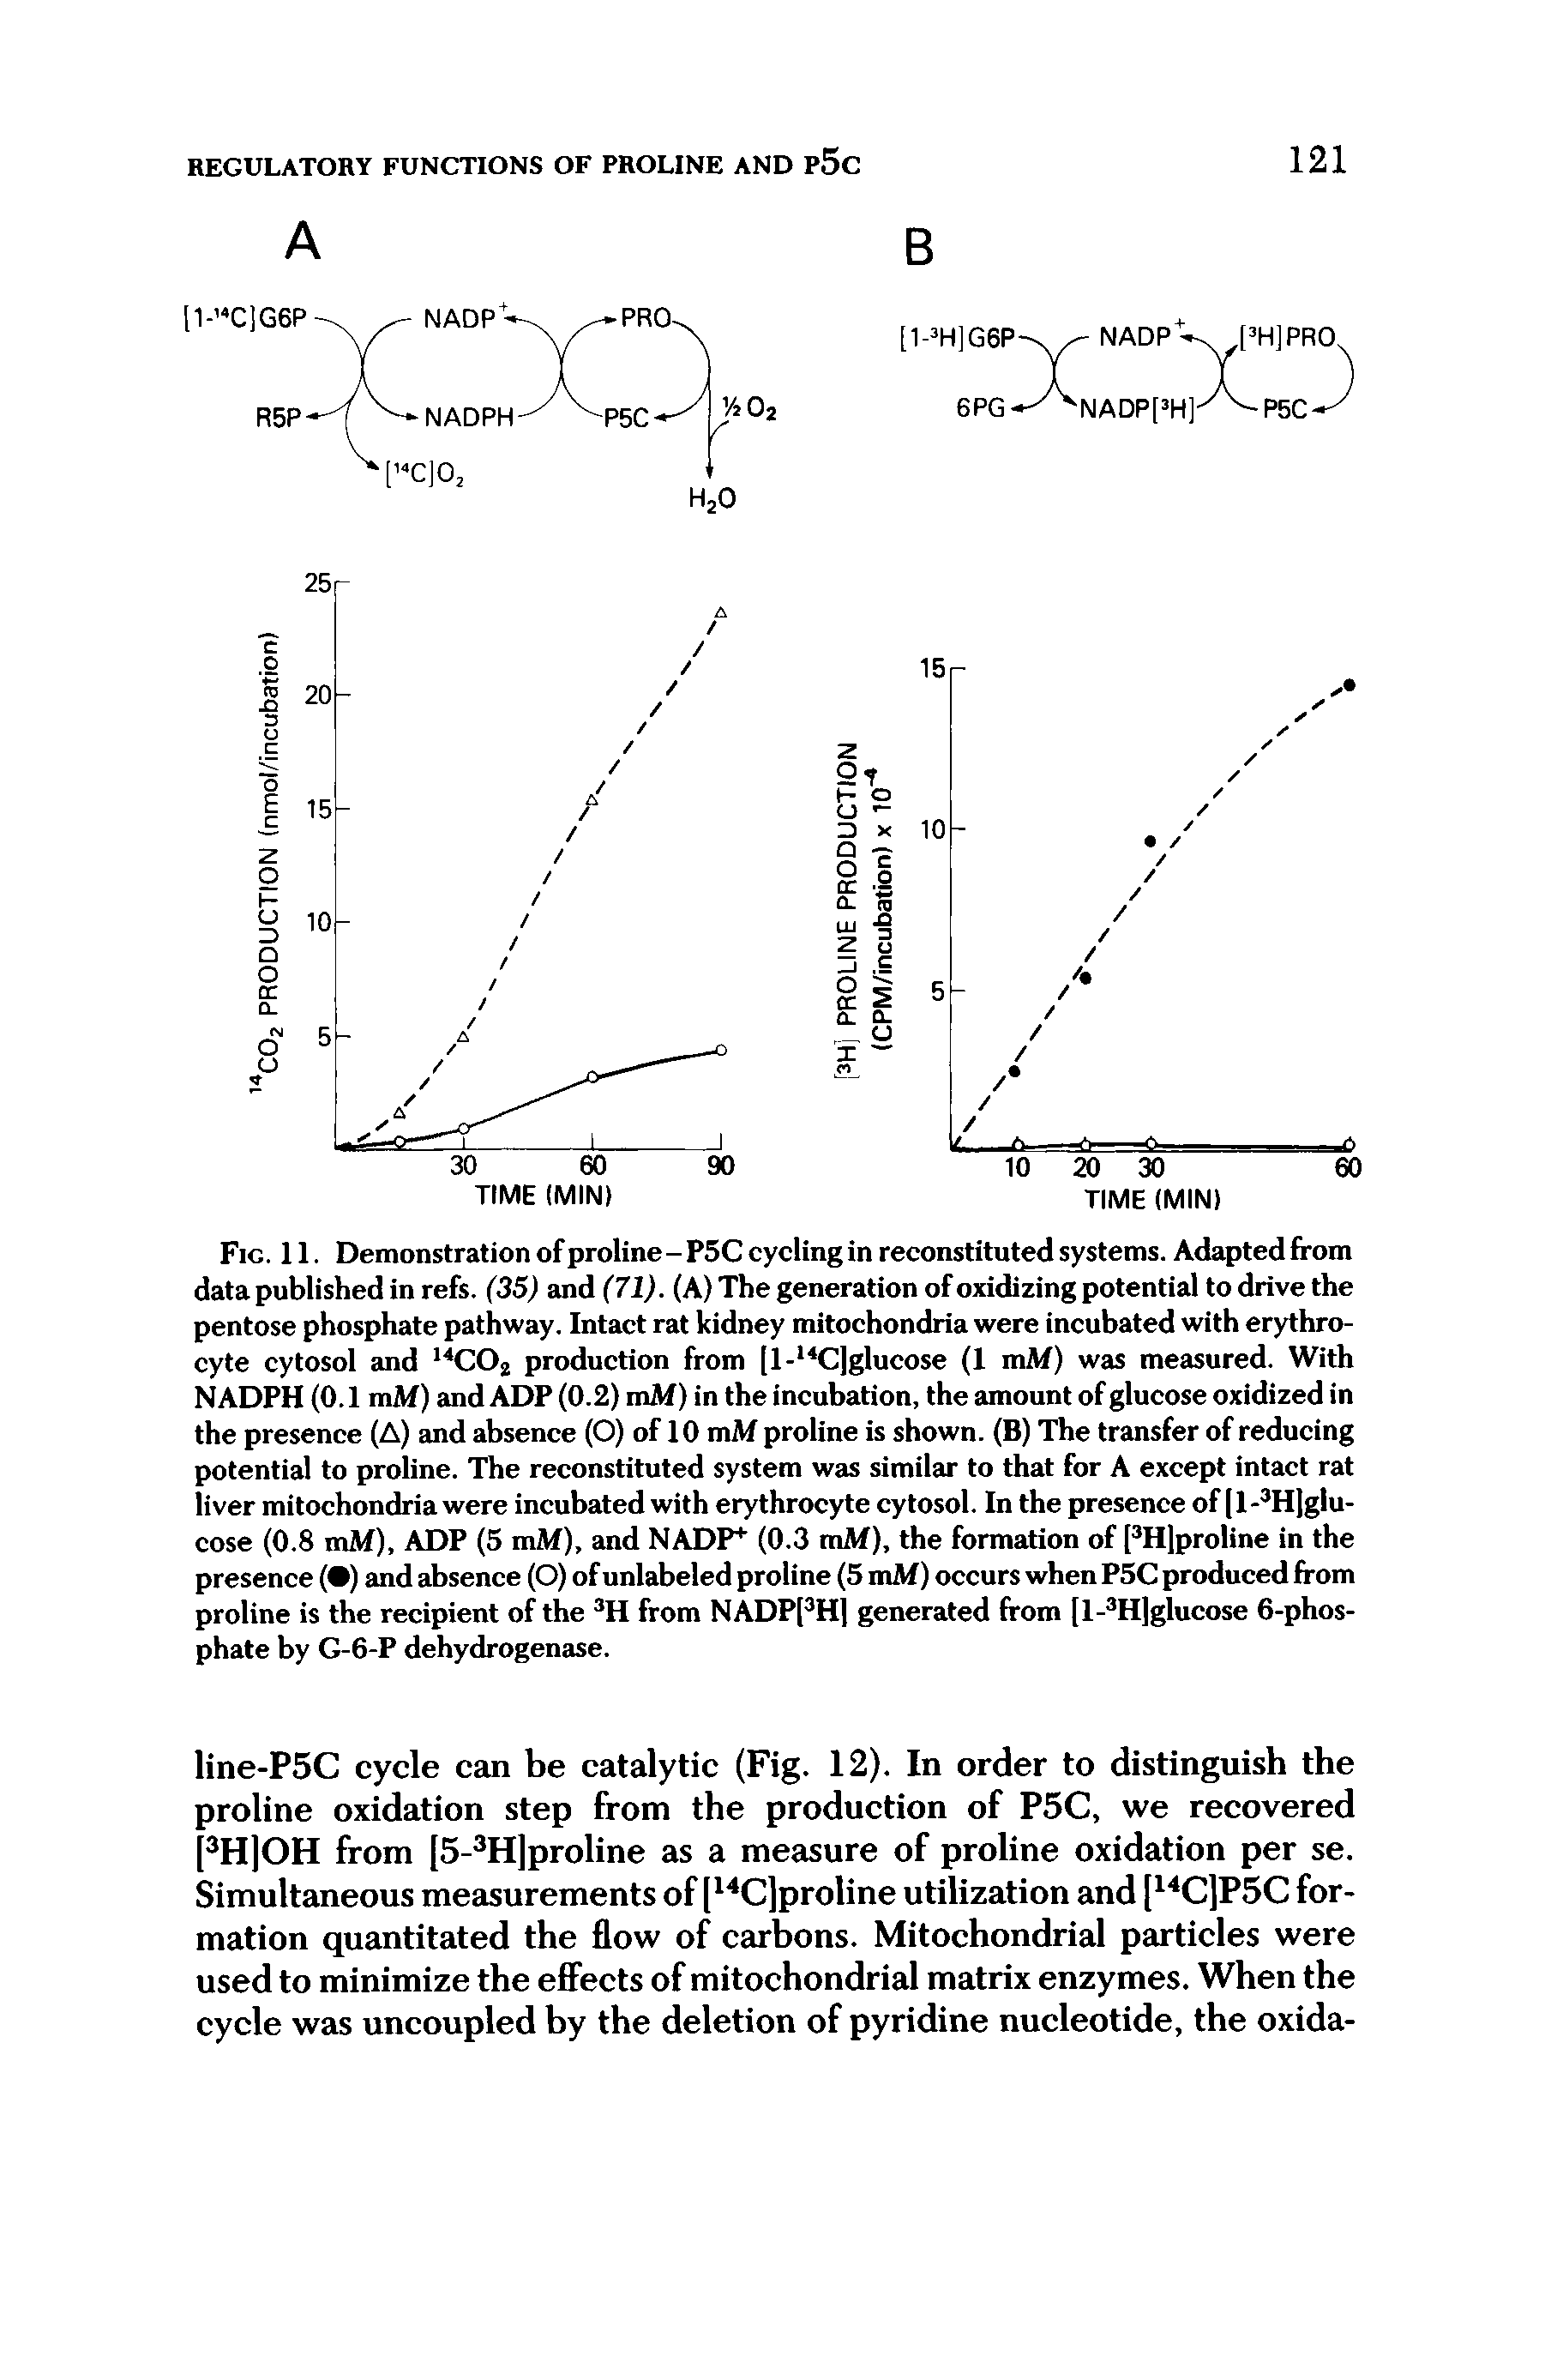 Fig. 11. Demonstration of proline - P5C cycling in reconstituted systems. Adapted from data published in refs. (35) and (71). (A) The generation of oxidizing potential to drive the pentose phosphate pathway. Intact rat kidney mitochondria were incubated with erythrocyte cytosol and COj production from [l- C]glucose (1 mAf) was measured. With NADPH (0.1 mM) and ADP (0.2) mM) in the incubation, the amount of glucose oxidized in the presence (A) and absence (O) of 10 mM proline is shown. (B) The transfer of reducing potential to proline. The reconstituted system was similar to that for A except intact rat liver mitochondria were incubated with erythrocyte cytosol. In the presence of [ 1 - H]glu-cose (0.8 mM), ADP (5 mM), and NADP (0.3 rnM), the formation of PH]proline in the presence ( ) and absence (O) of unlabeled proline (5 mM) occurs when P5C produced from proline is the recipient of the from NADPPH] generated from [l- H]glucose 6-phosphate by G-6-P dehydrogenase.